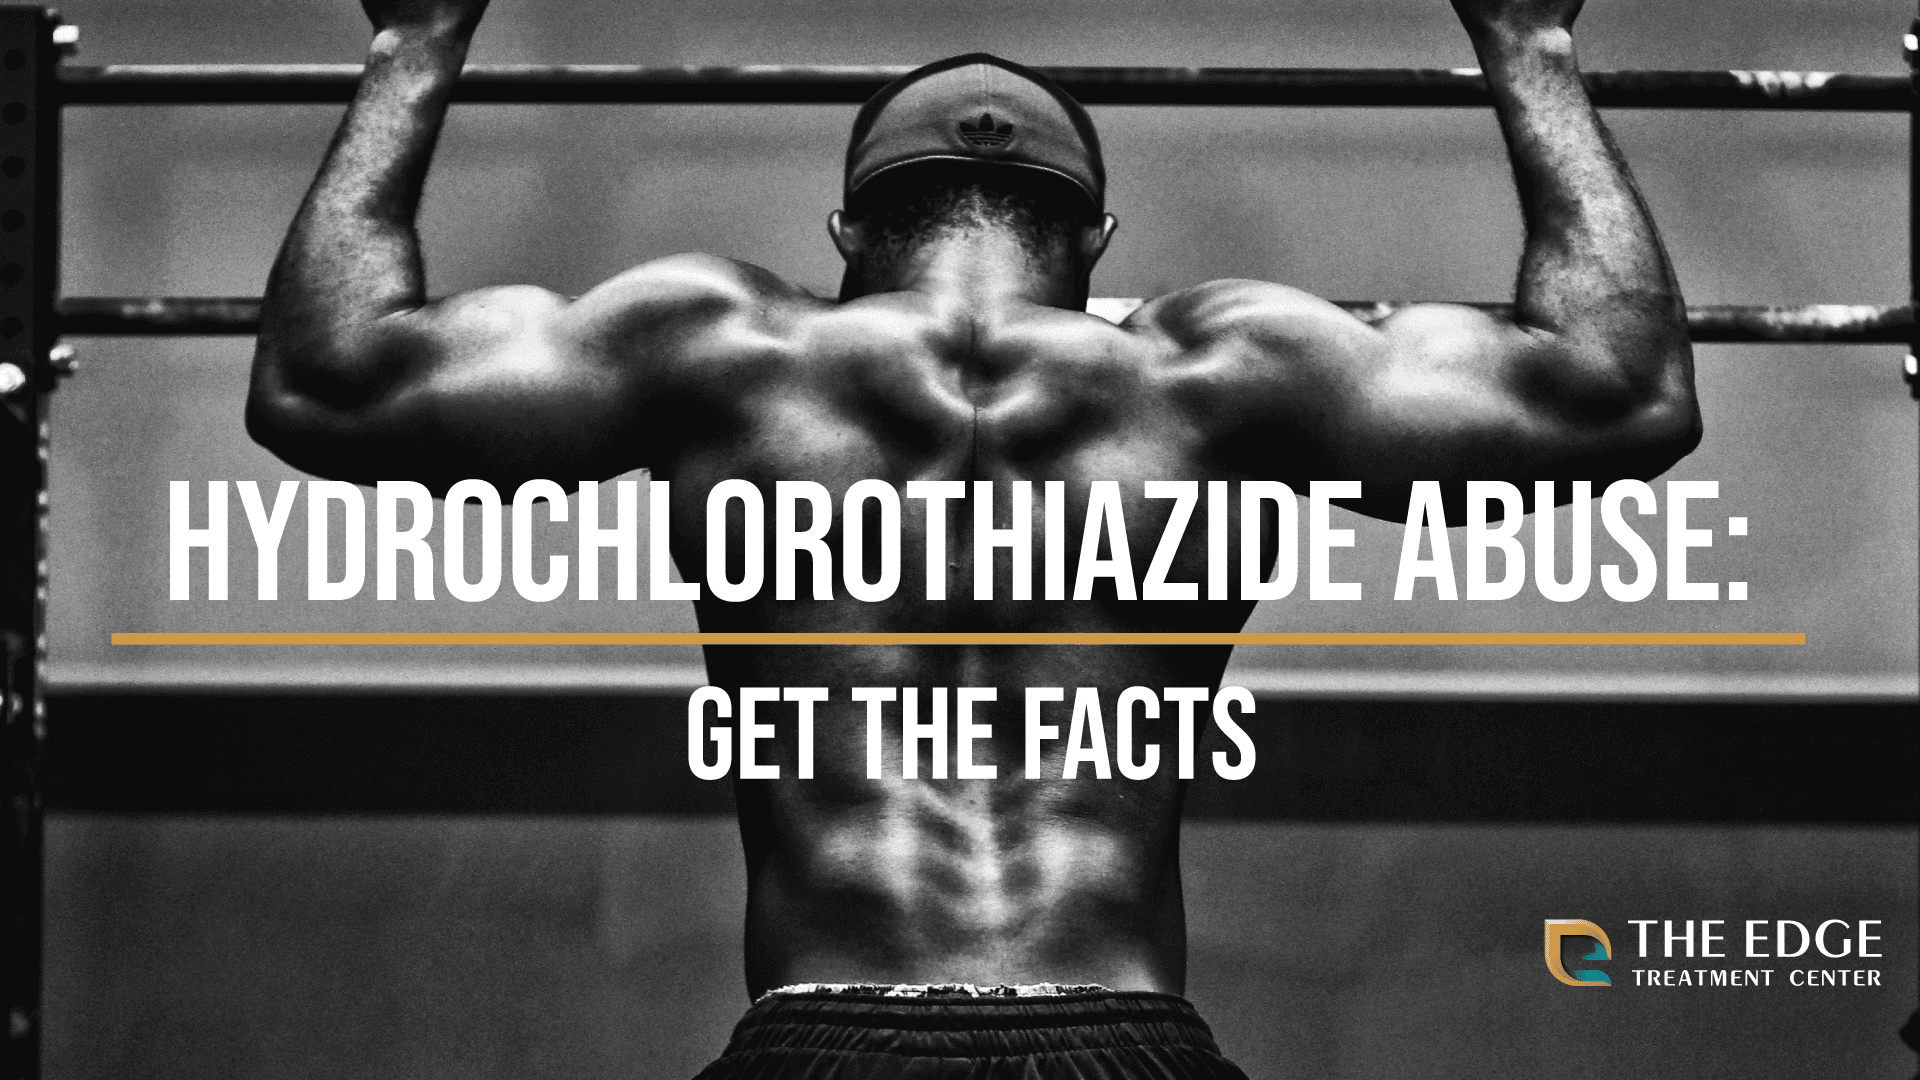 Everything You Wanted to Know About Hydrochlorothiazide Abuse